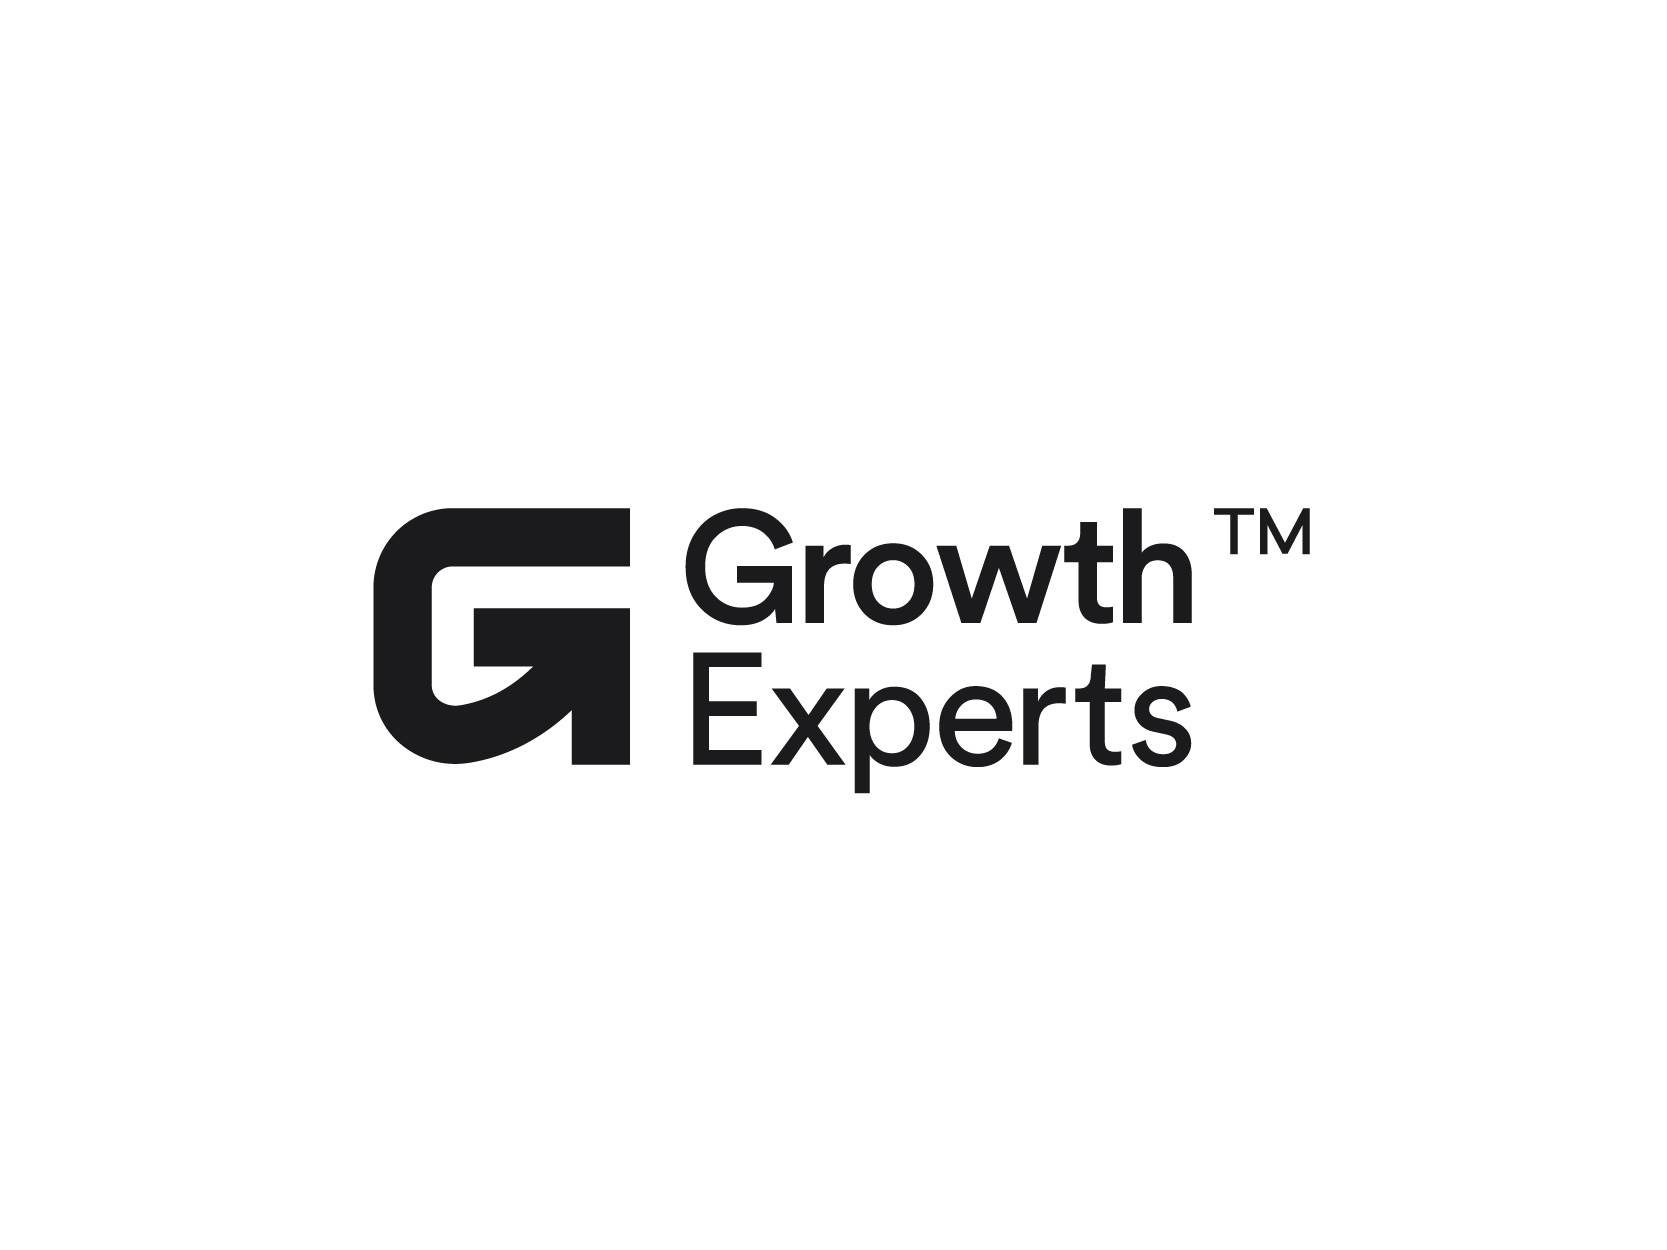 Growth Experts